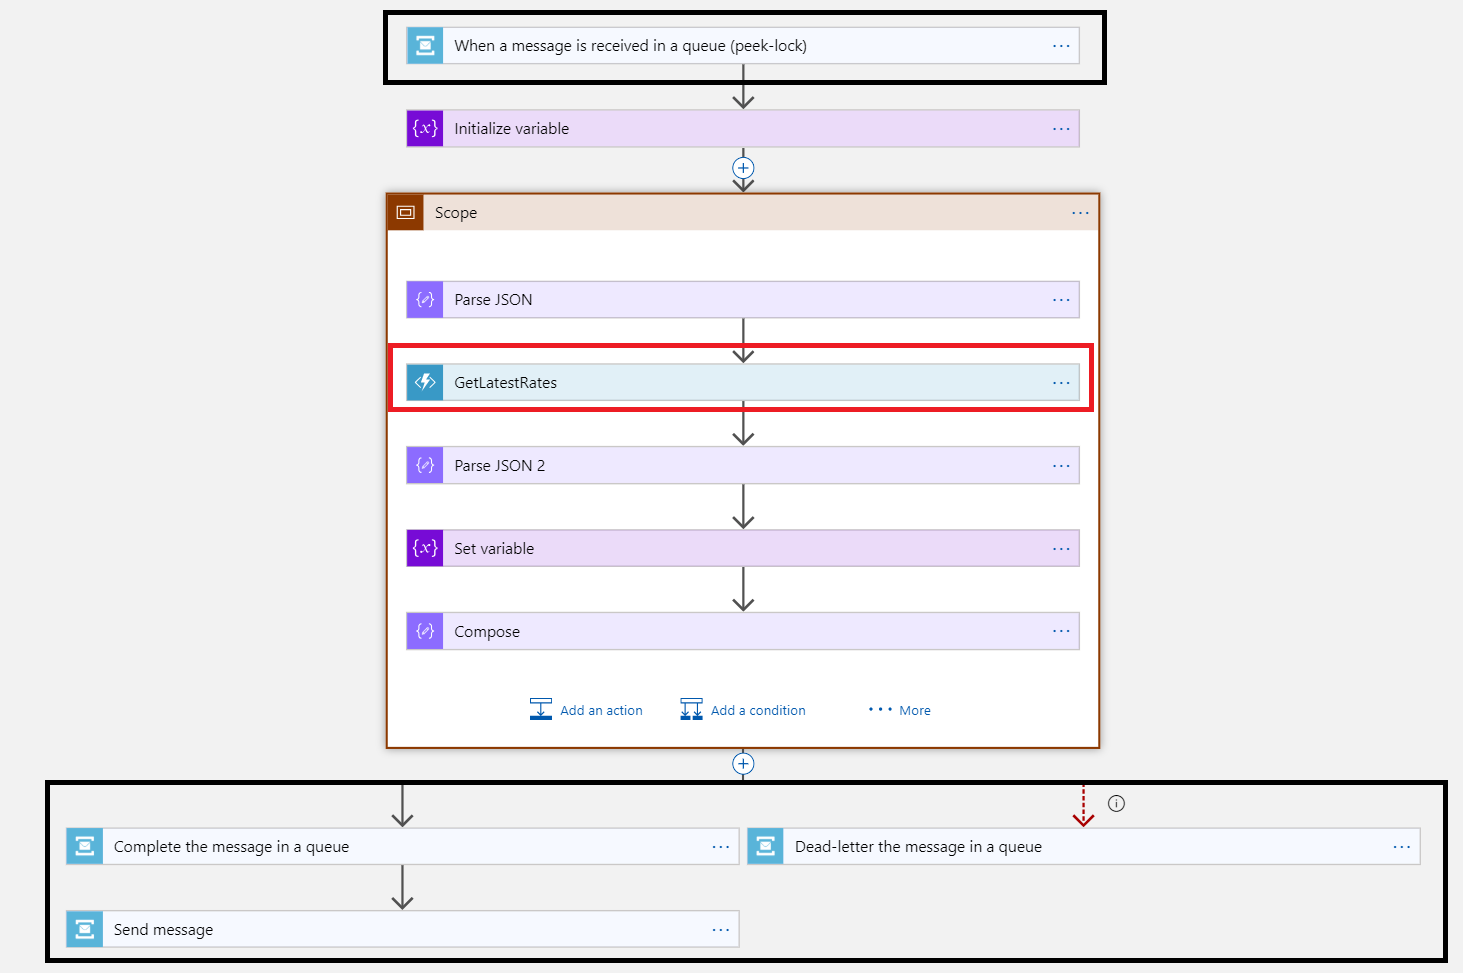 Decide When to use Logic Apps and Azure Functions in real time